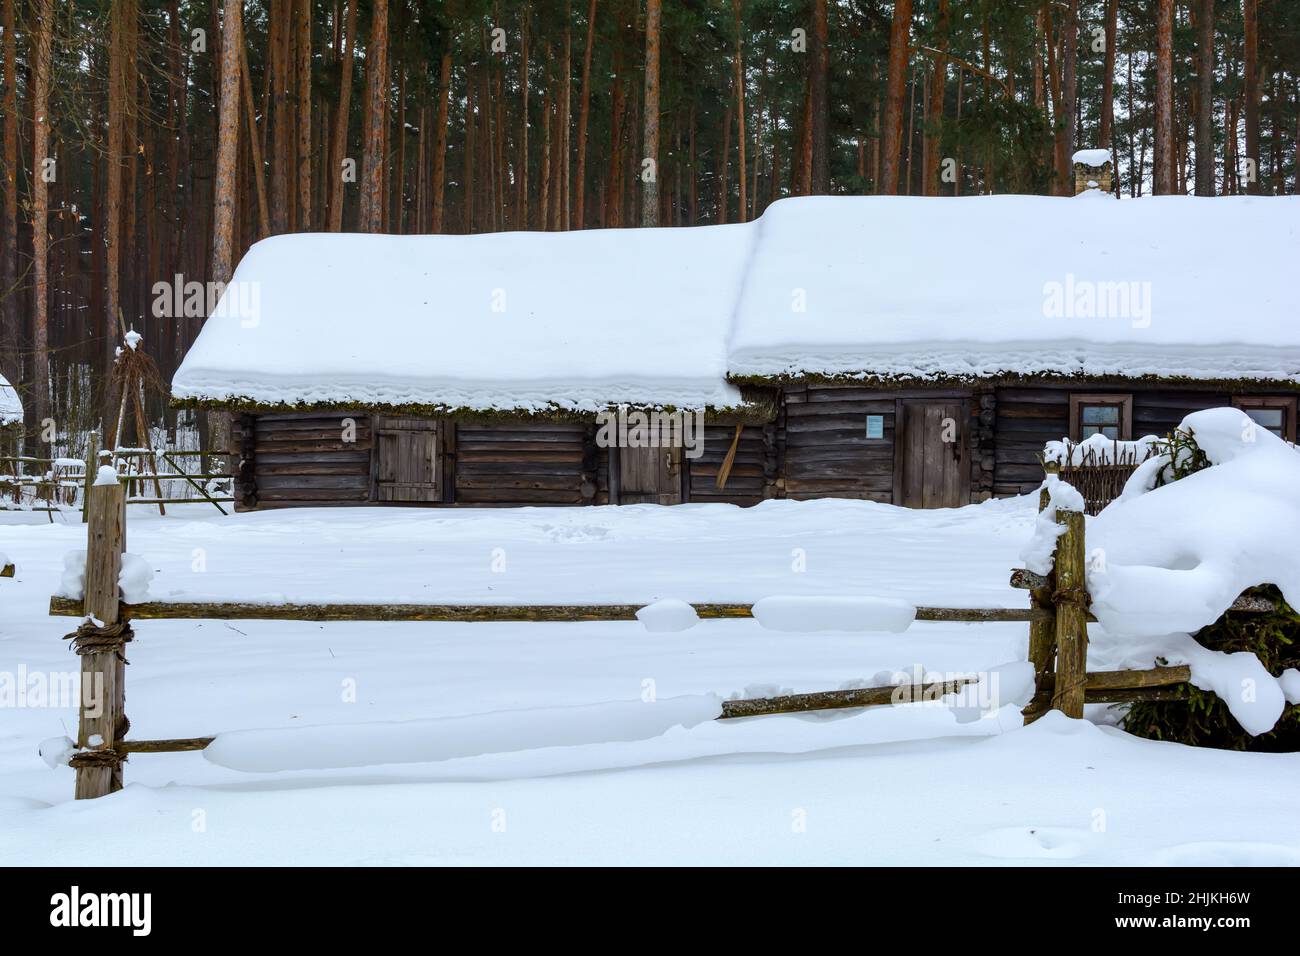 Old wooden log house covered with snow Stock Photo